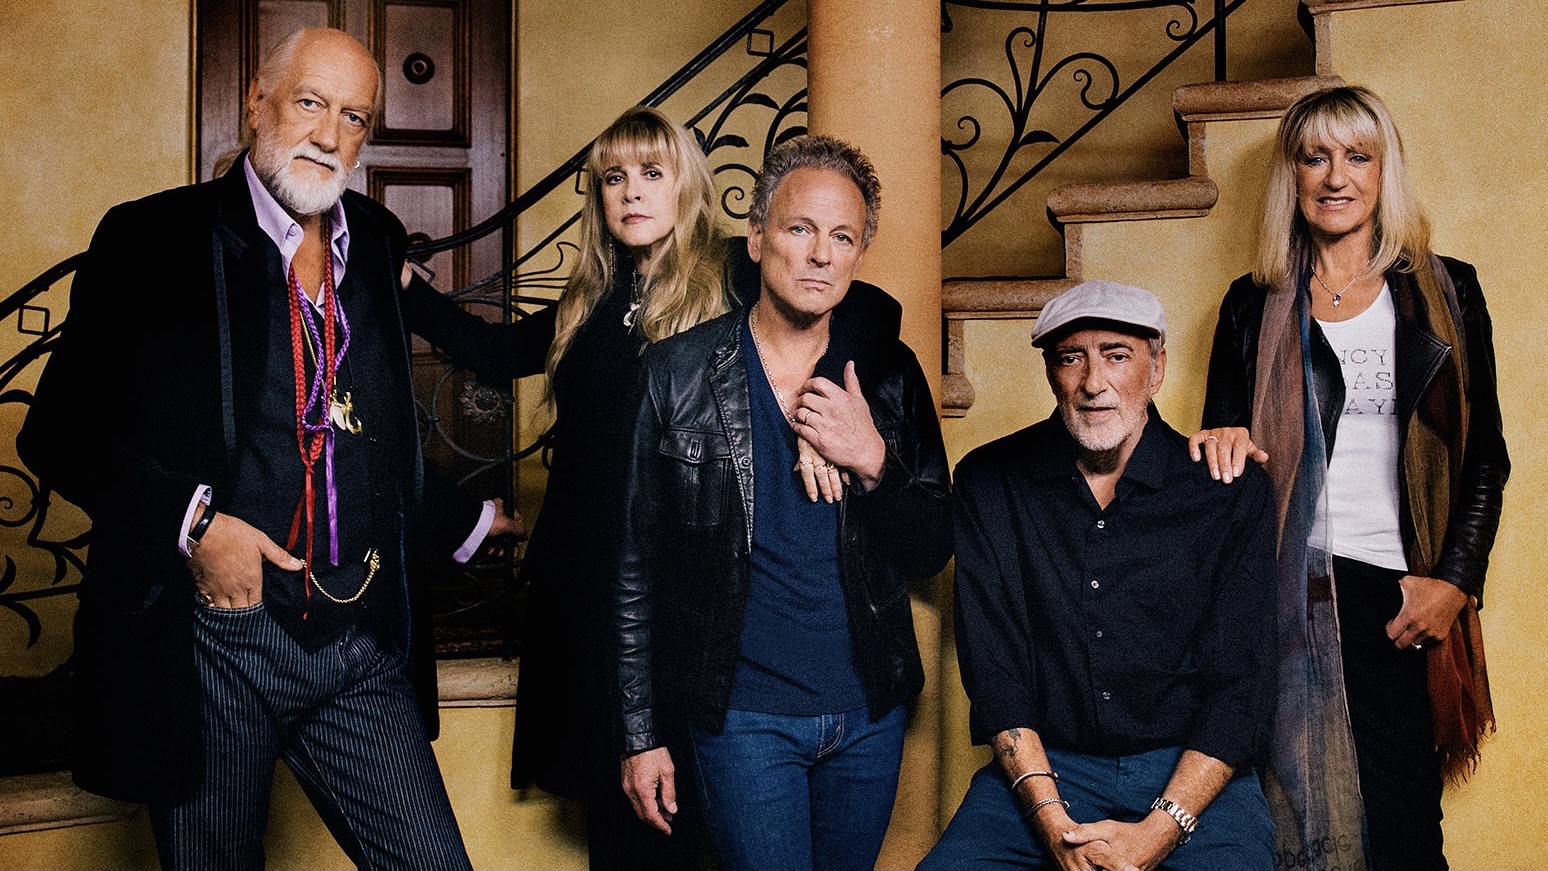 fleetwood mac is reuniting for a farewell world tour in 2018